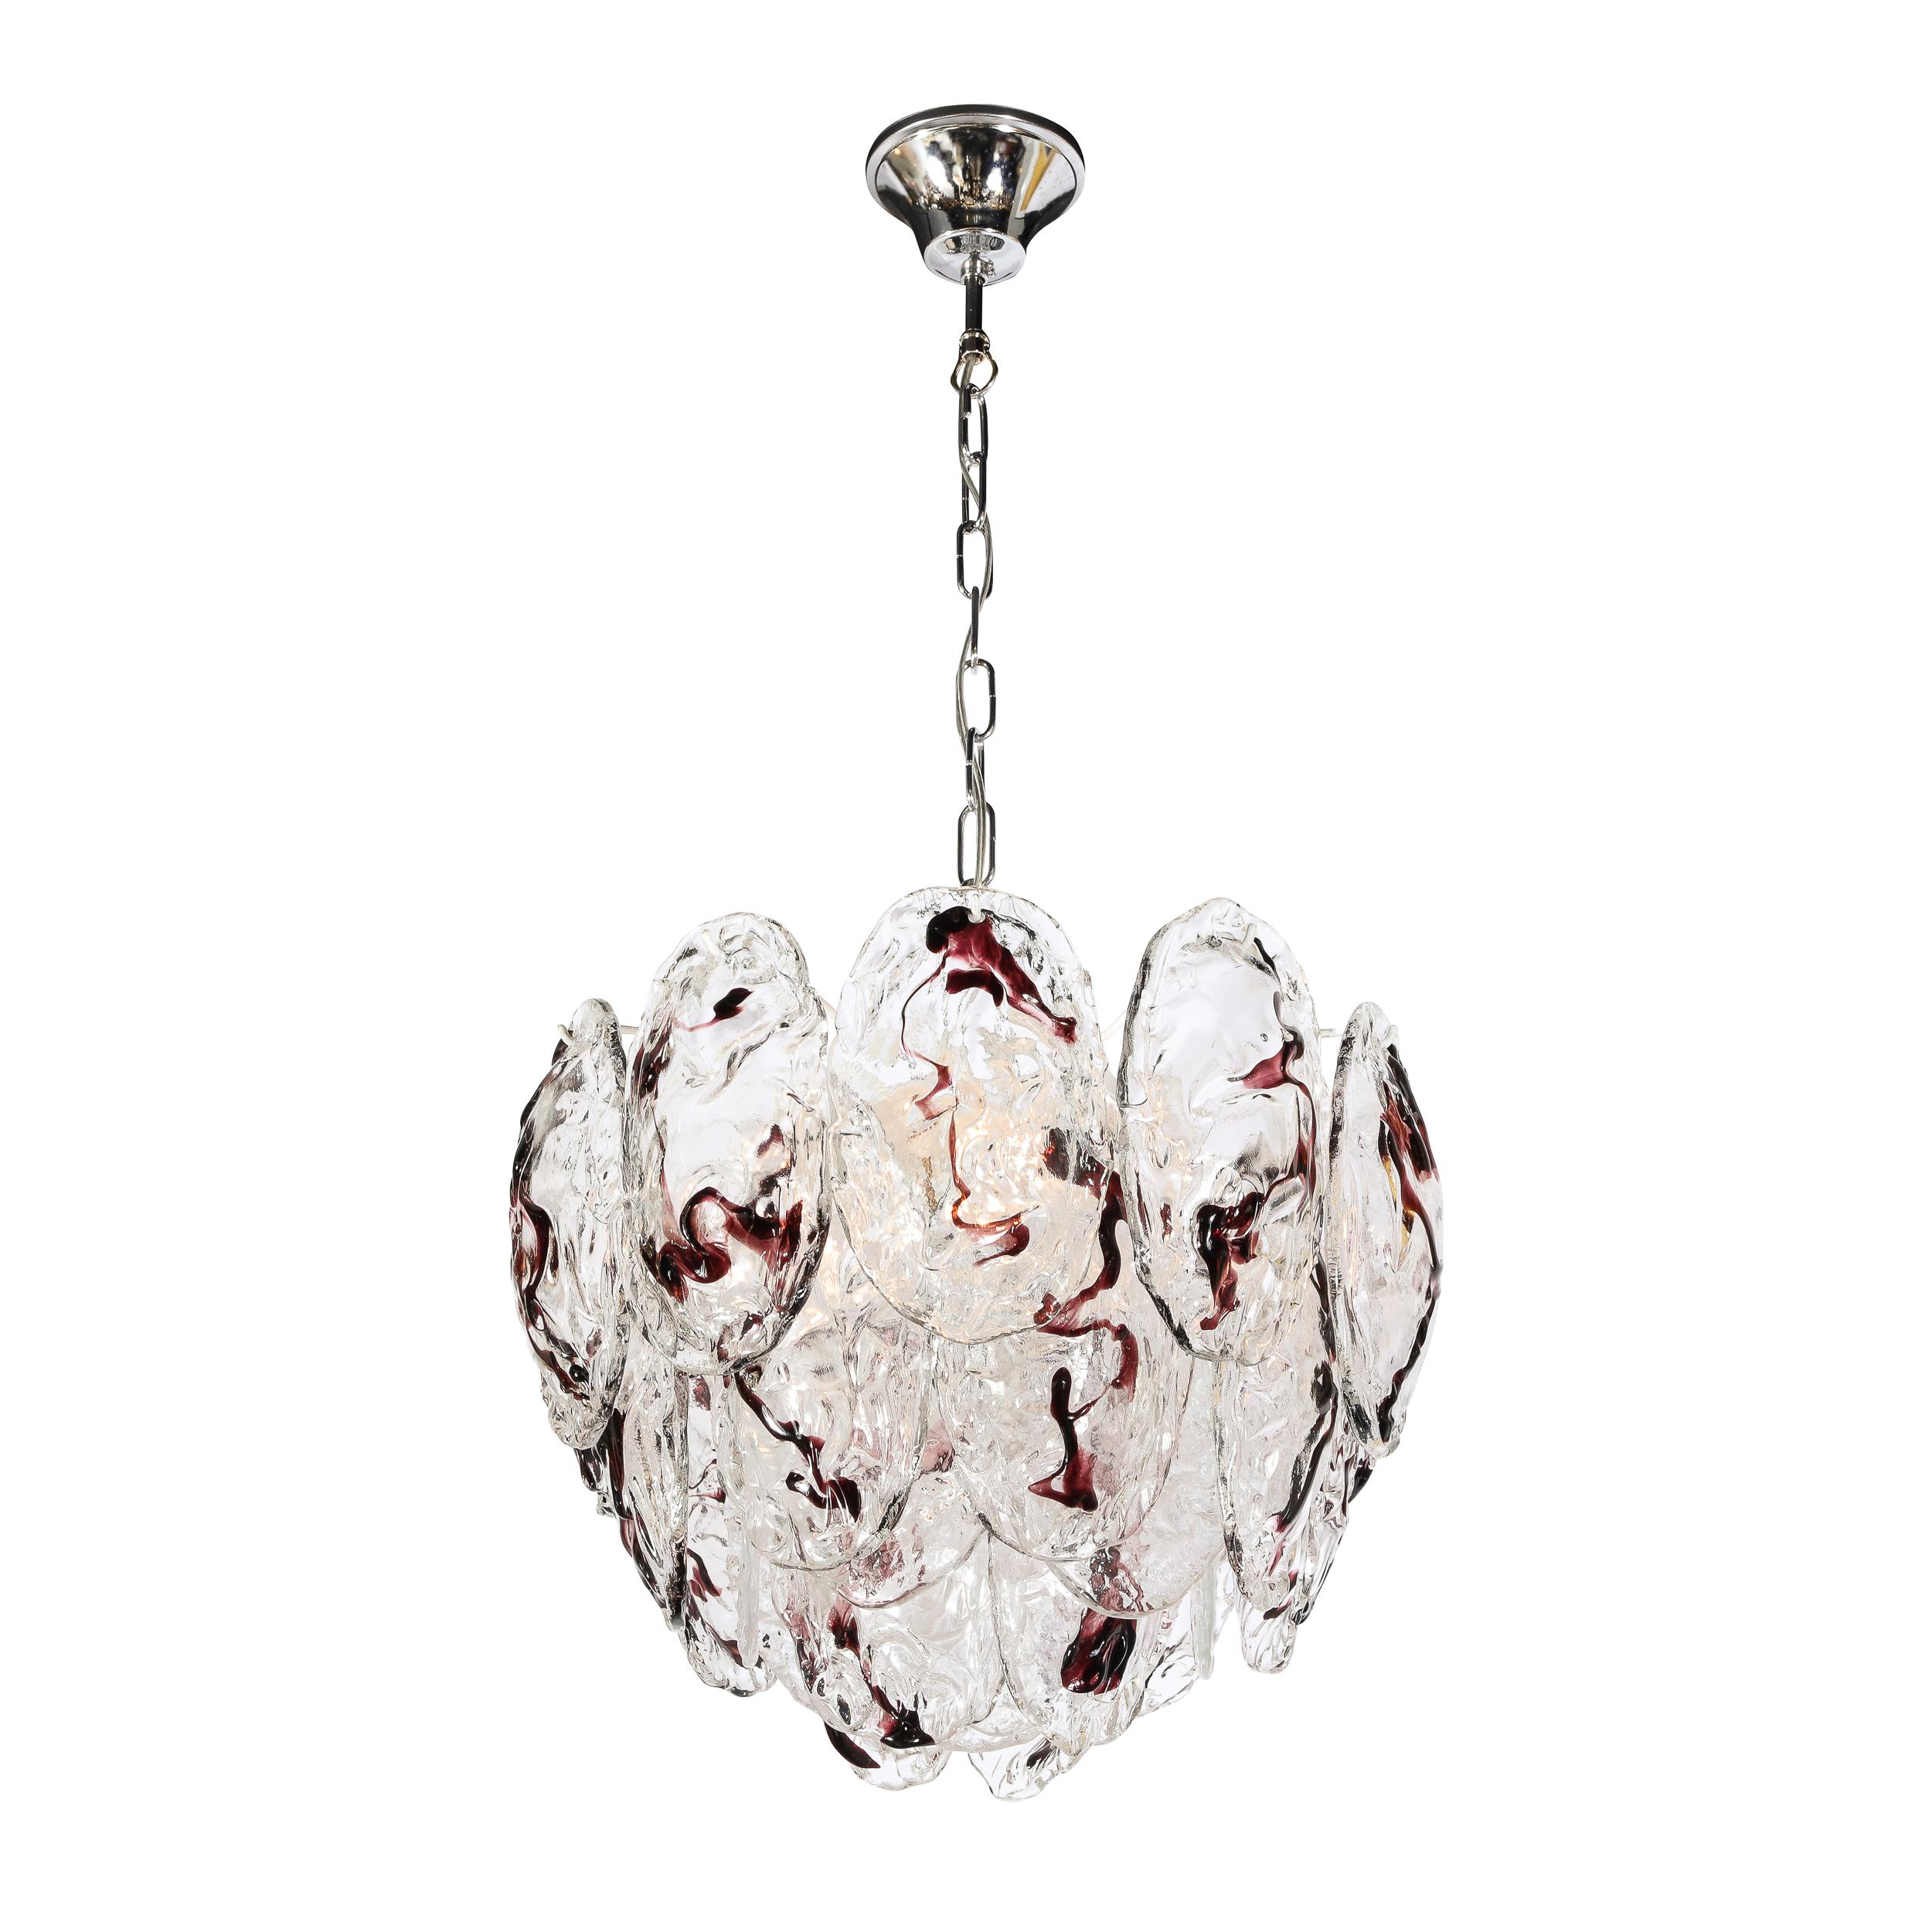 This elegant and mysterious Mid-Century Modernist Hand-Blown Murano Glass Chandelier by Mazzega originates from Italy, Circa 1970. Features hand-blown oval shaped mottled glass shades. Each is translucent with lovely textural variation. Each shade